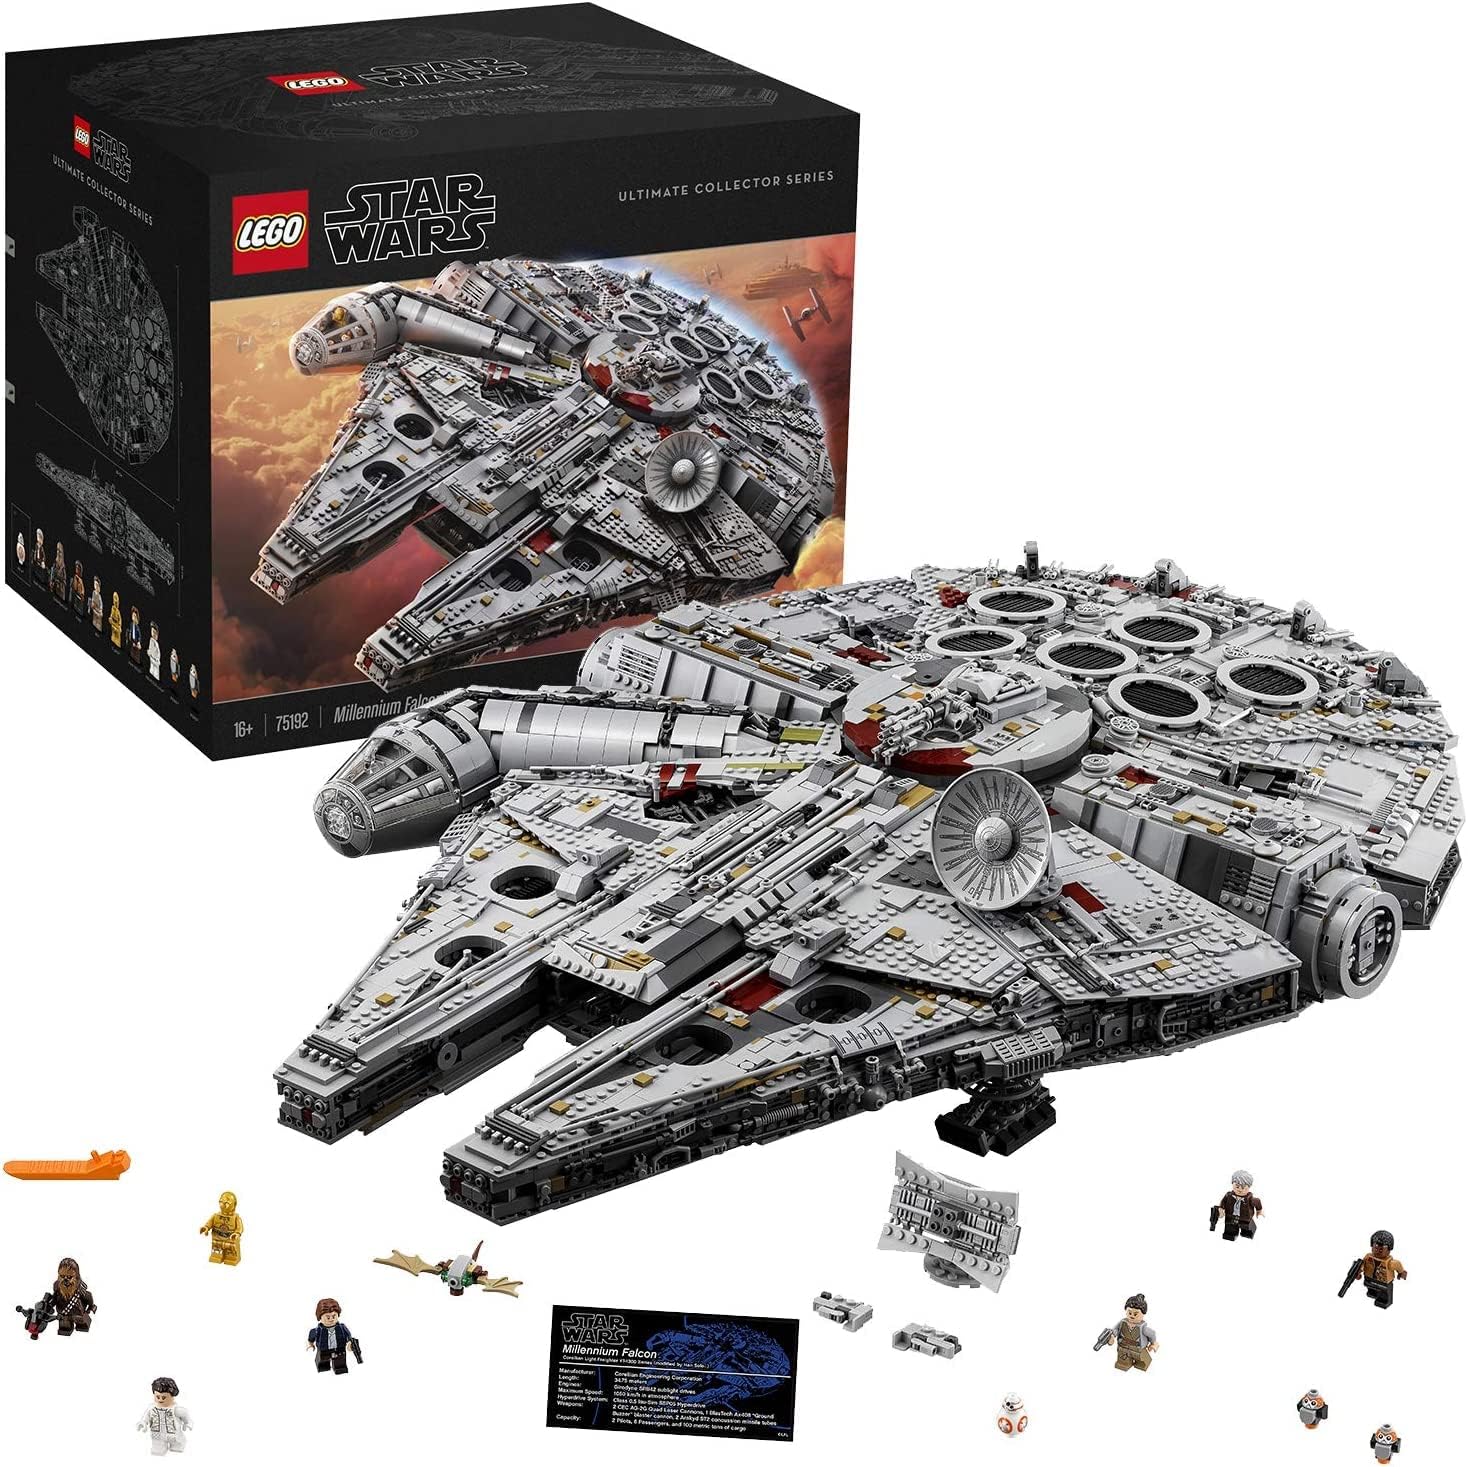 Star Wars Millennium Falcon LEGO - Highly Detailed 7,541 Pieces - Featuring Classic Figures and Han Solo's Iconic Ship